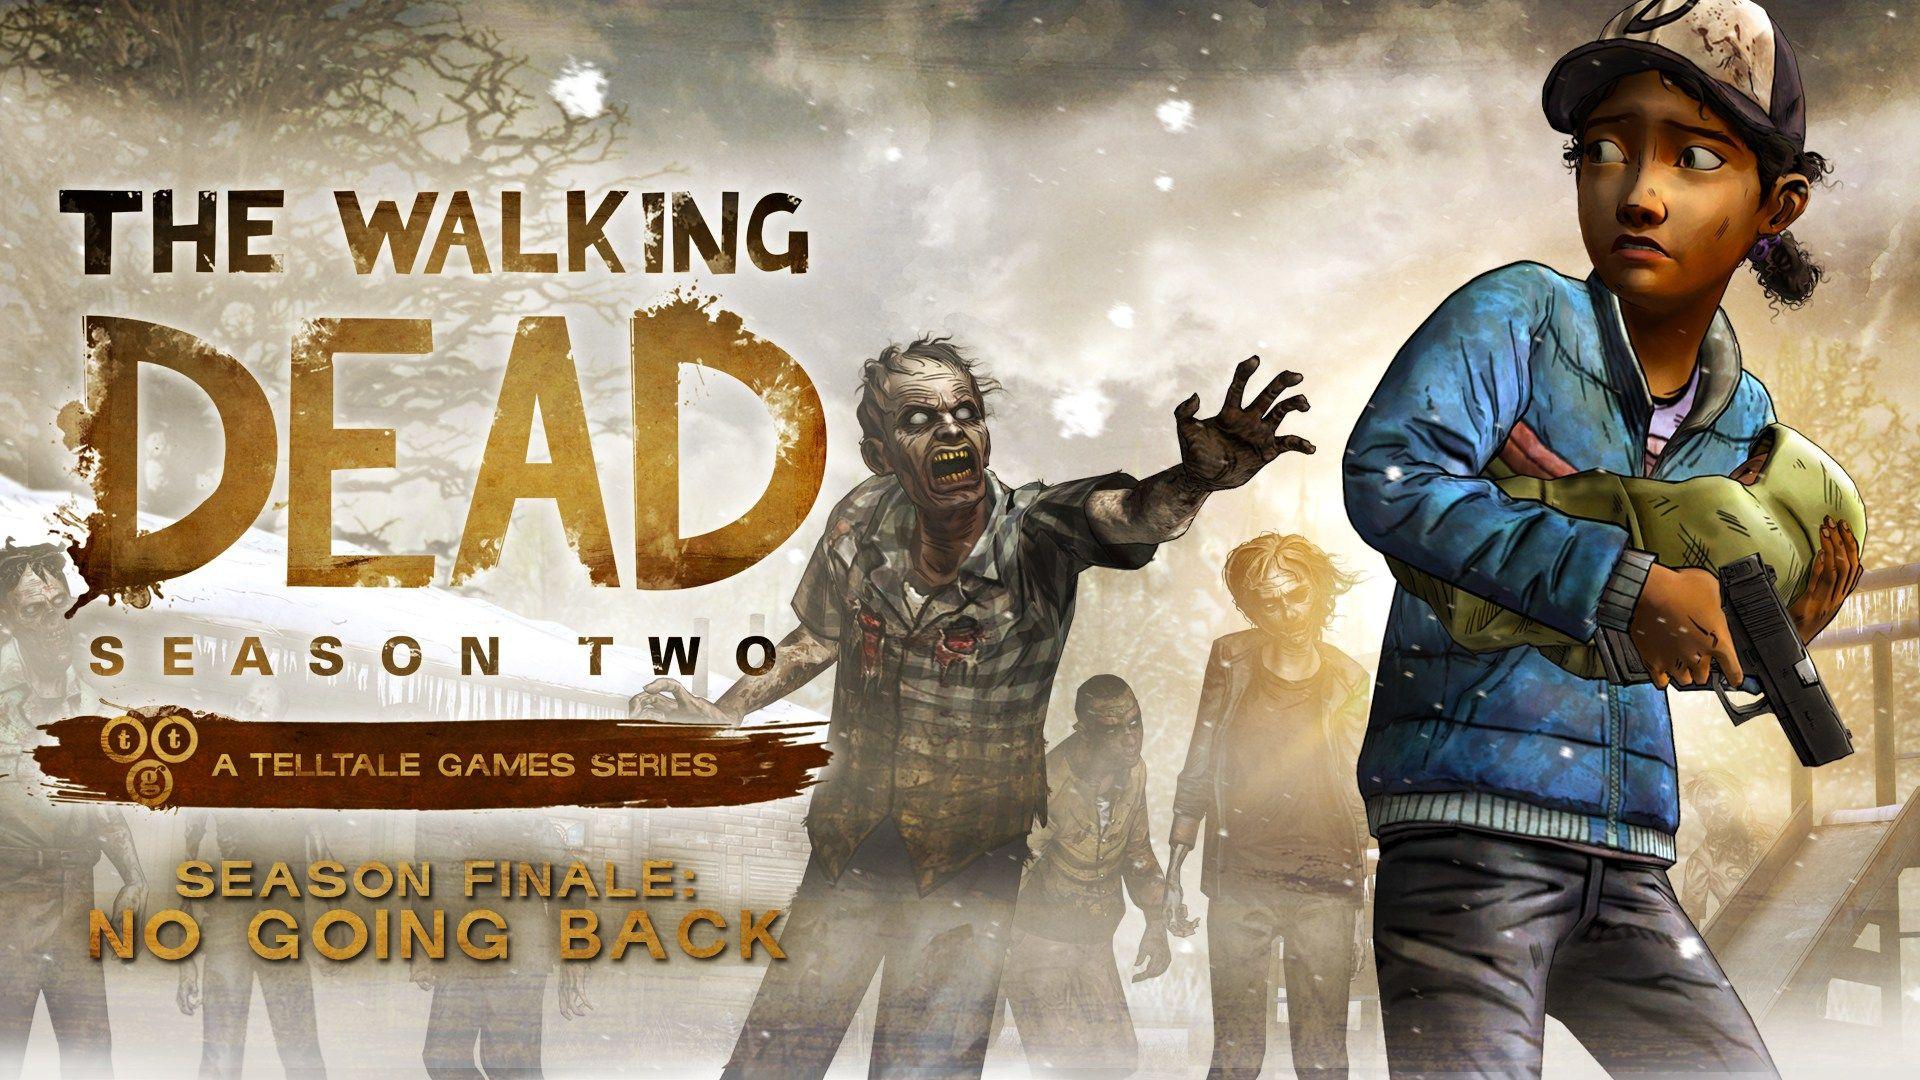 The Walking Dead Season 2 Episode 5 available now